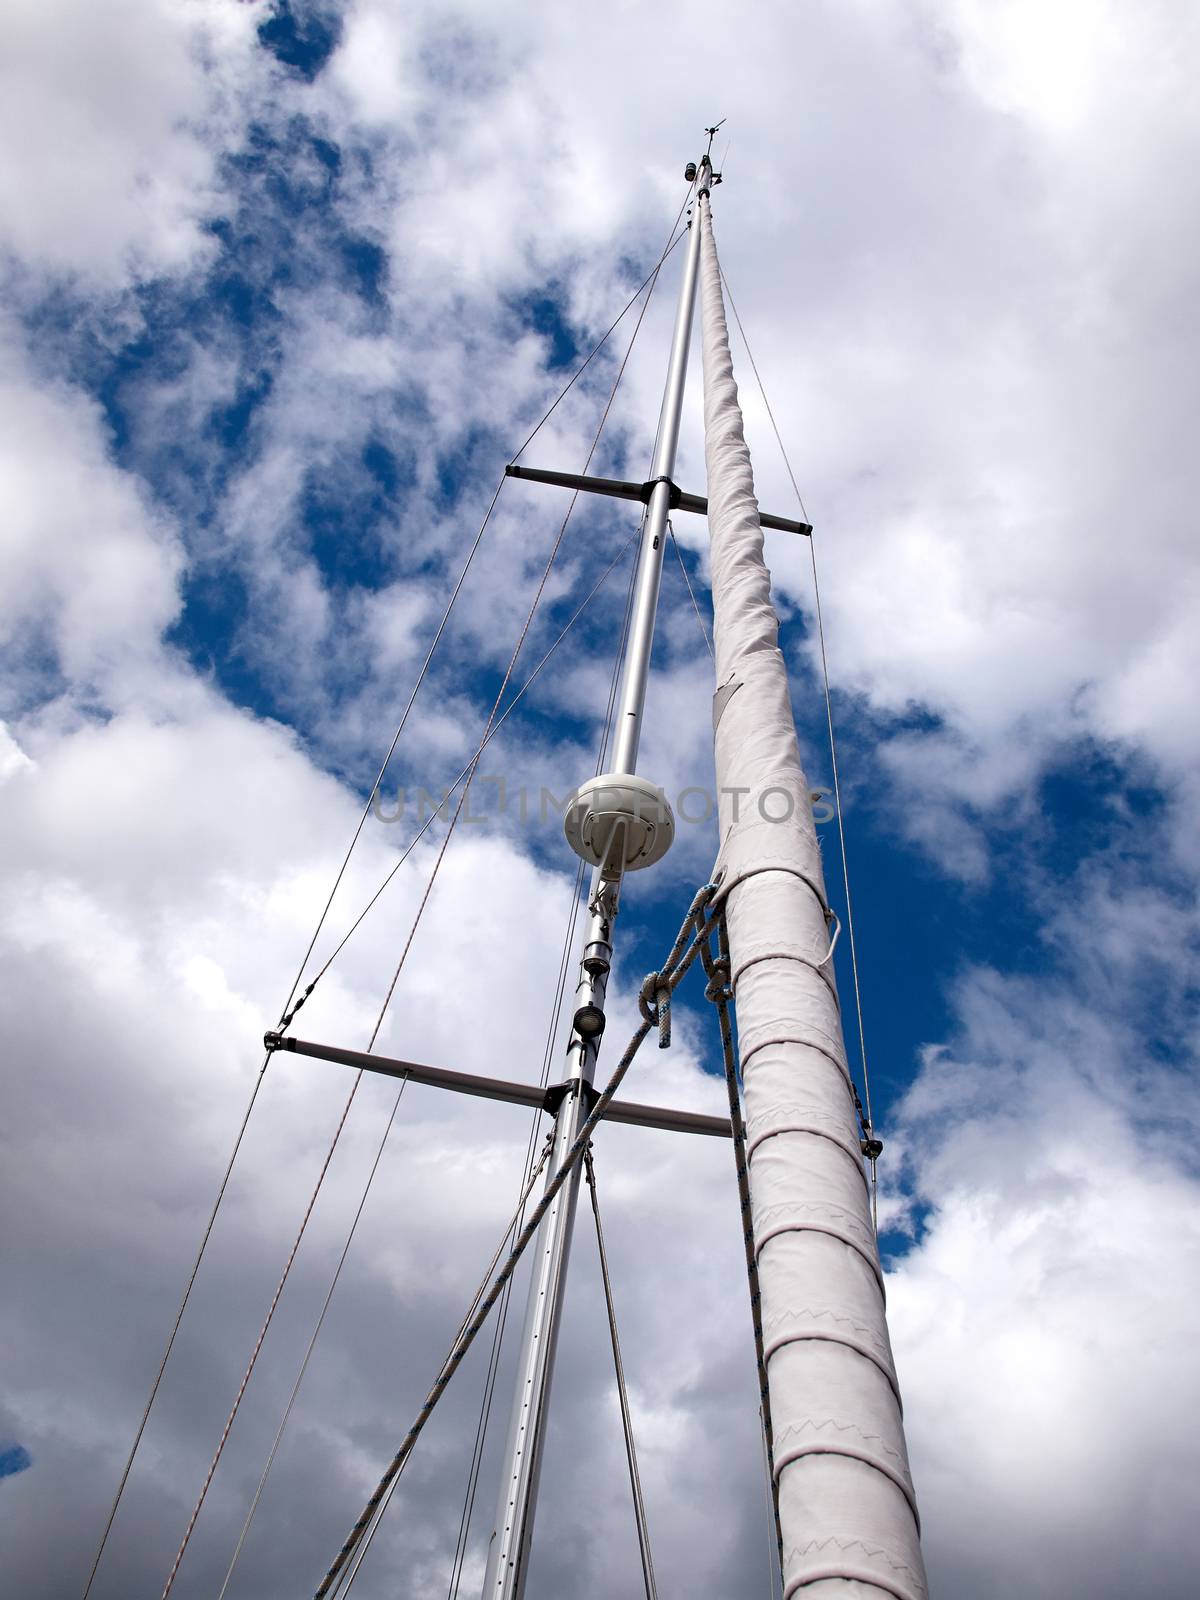 Sails and mast of a modern sail boat by Ronyzmbow